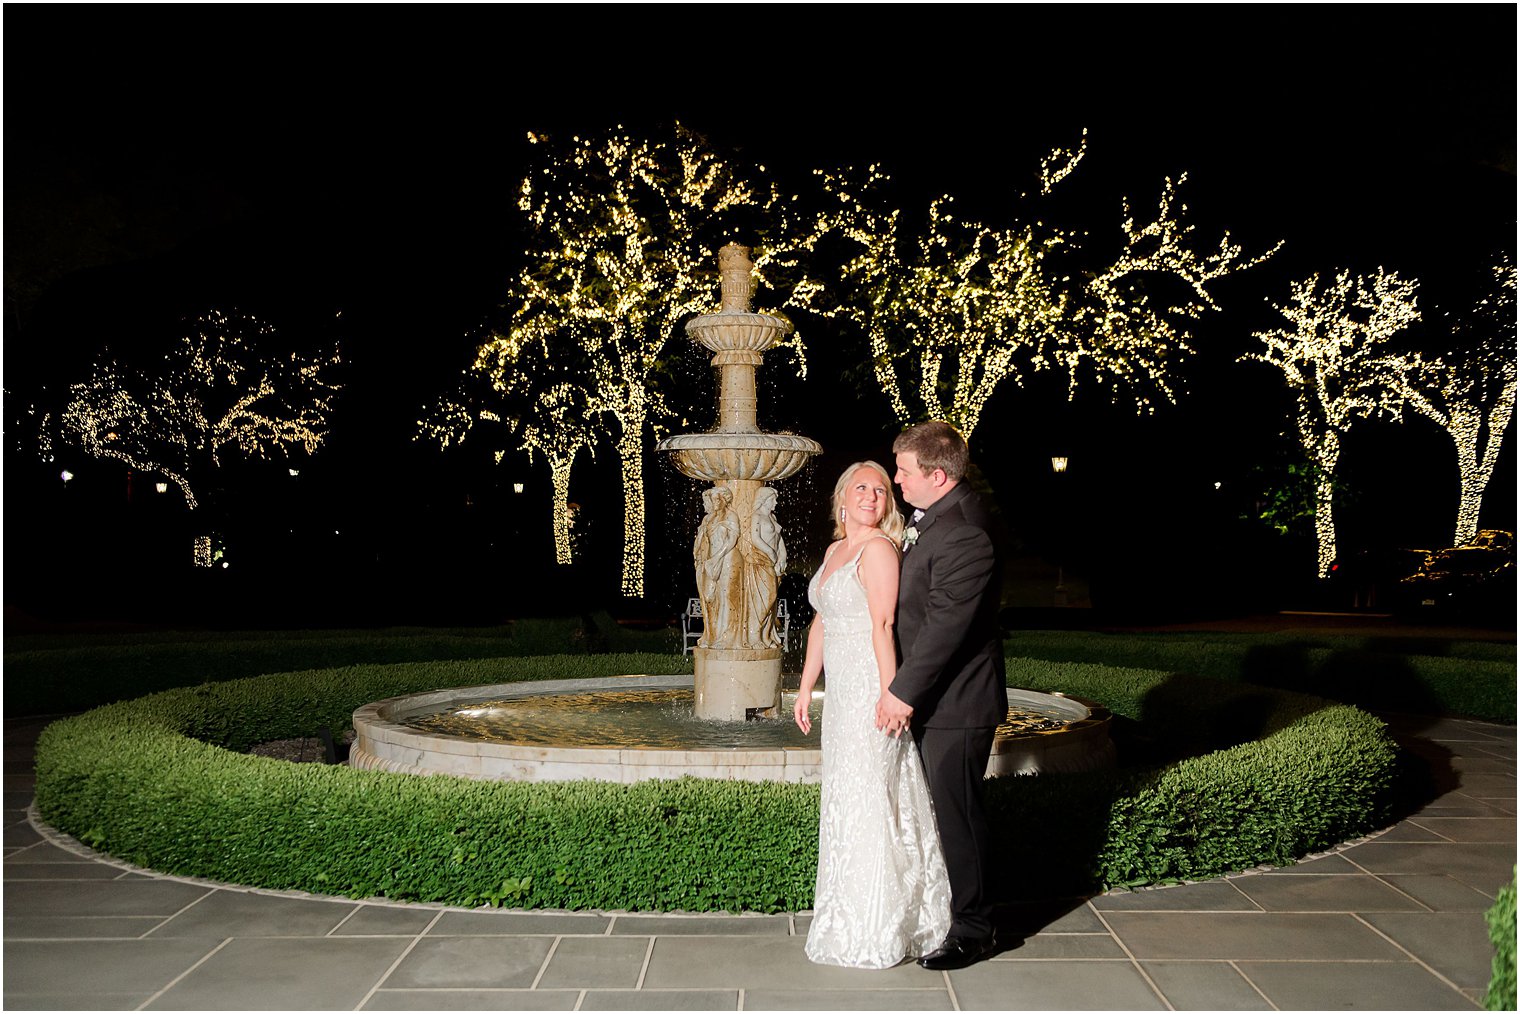 newlyweds in front of lighted trees 